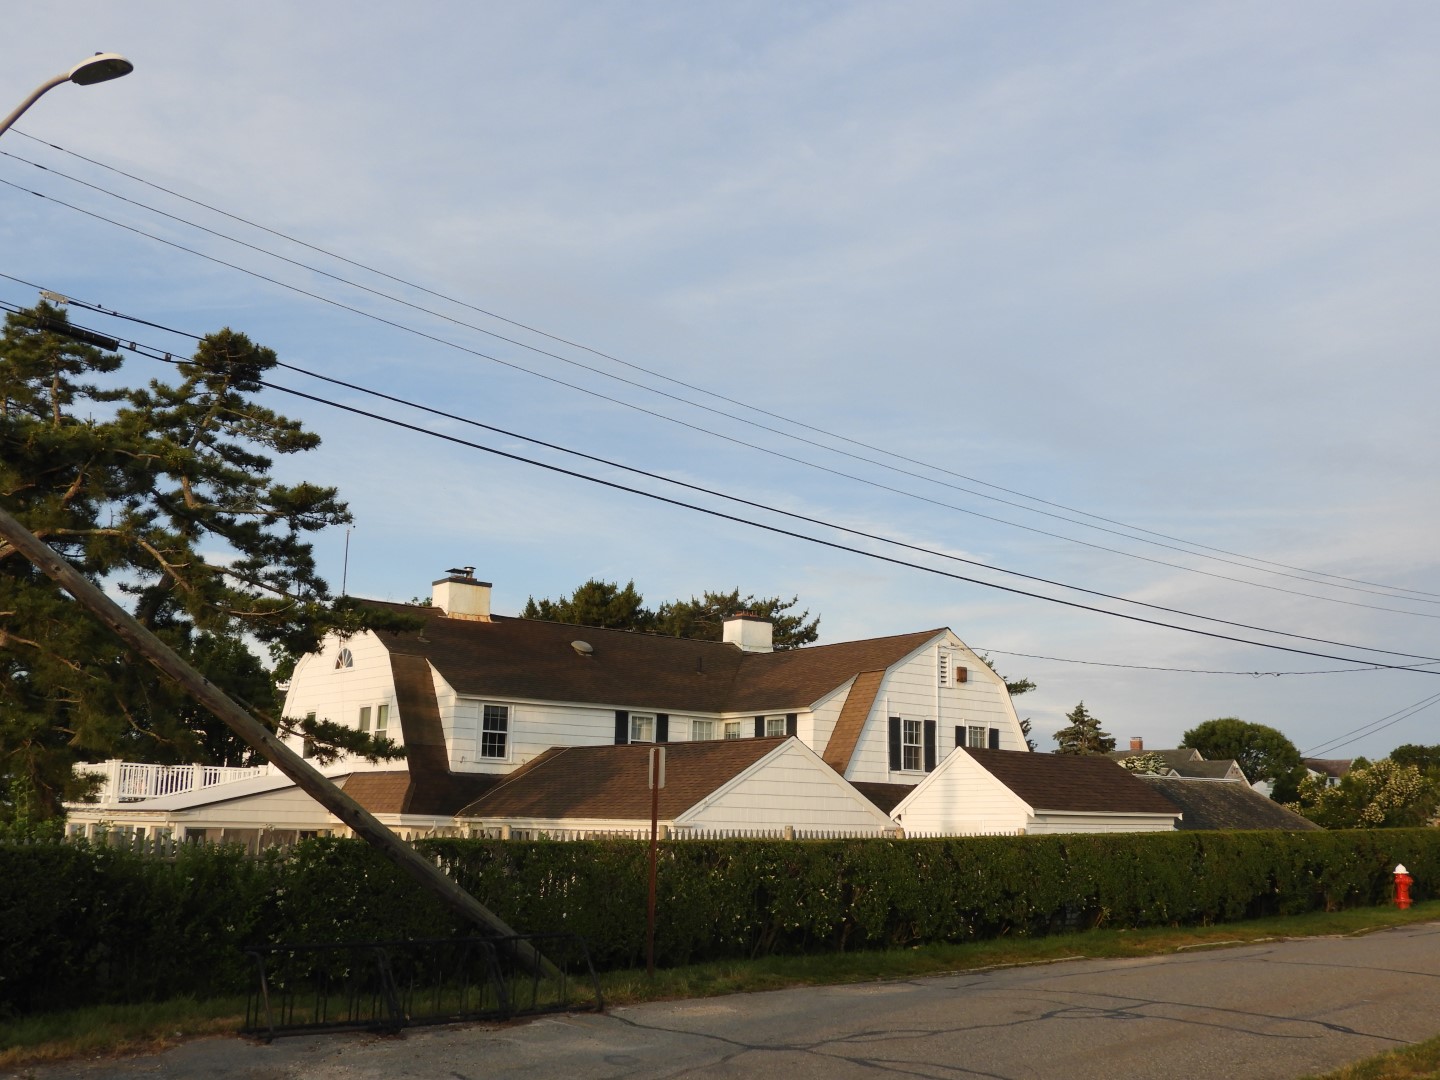 John Kennedy home compound  1 of 1 (#kennedy_compound_hyannis_port)